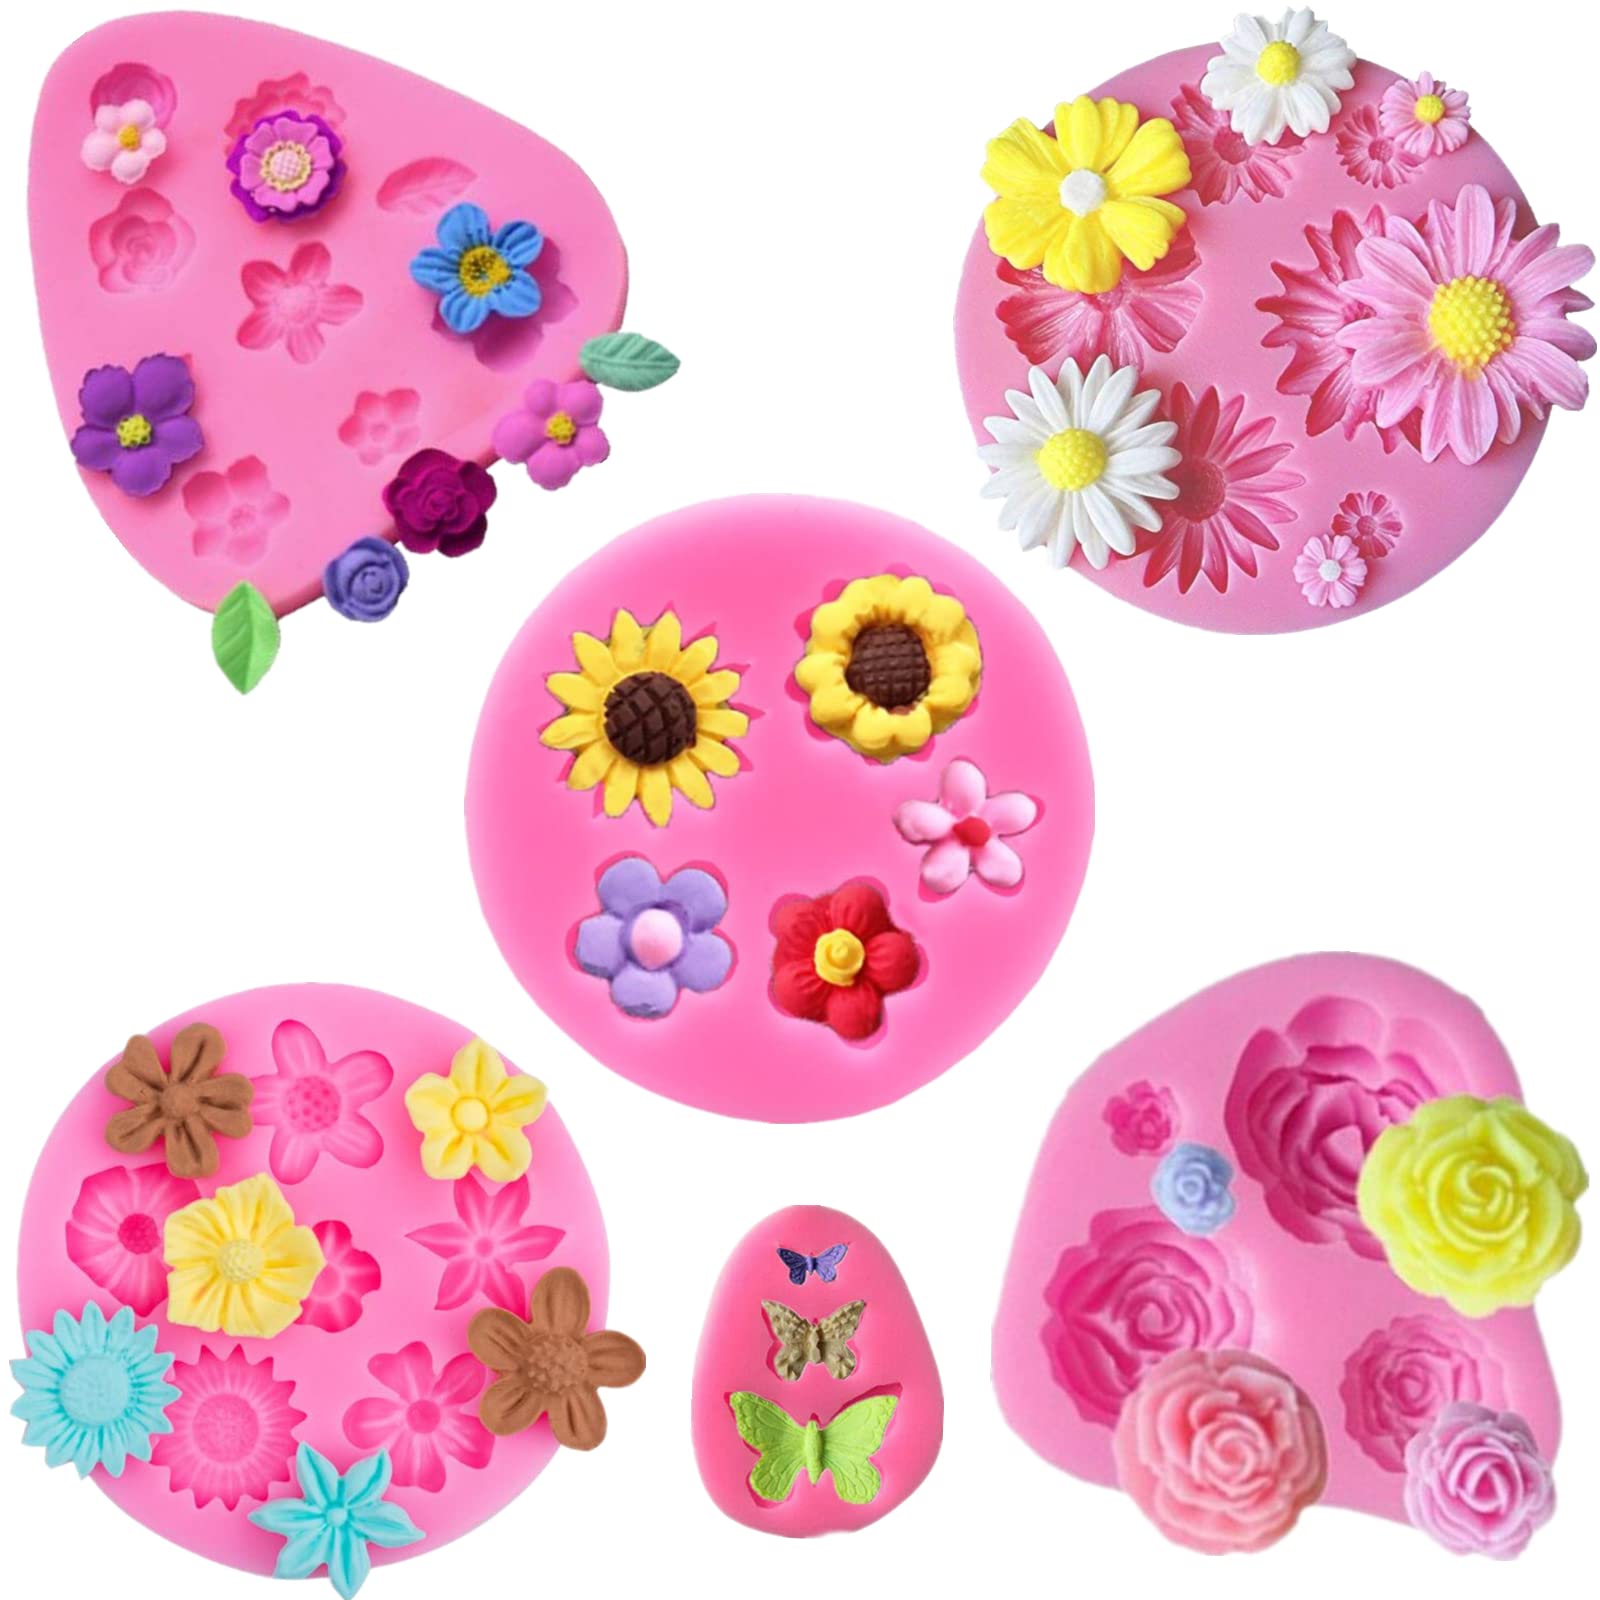 6 Pcs Flower Silicone Mold Set Rose Daisy Butterfly and Mini